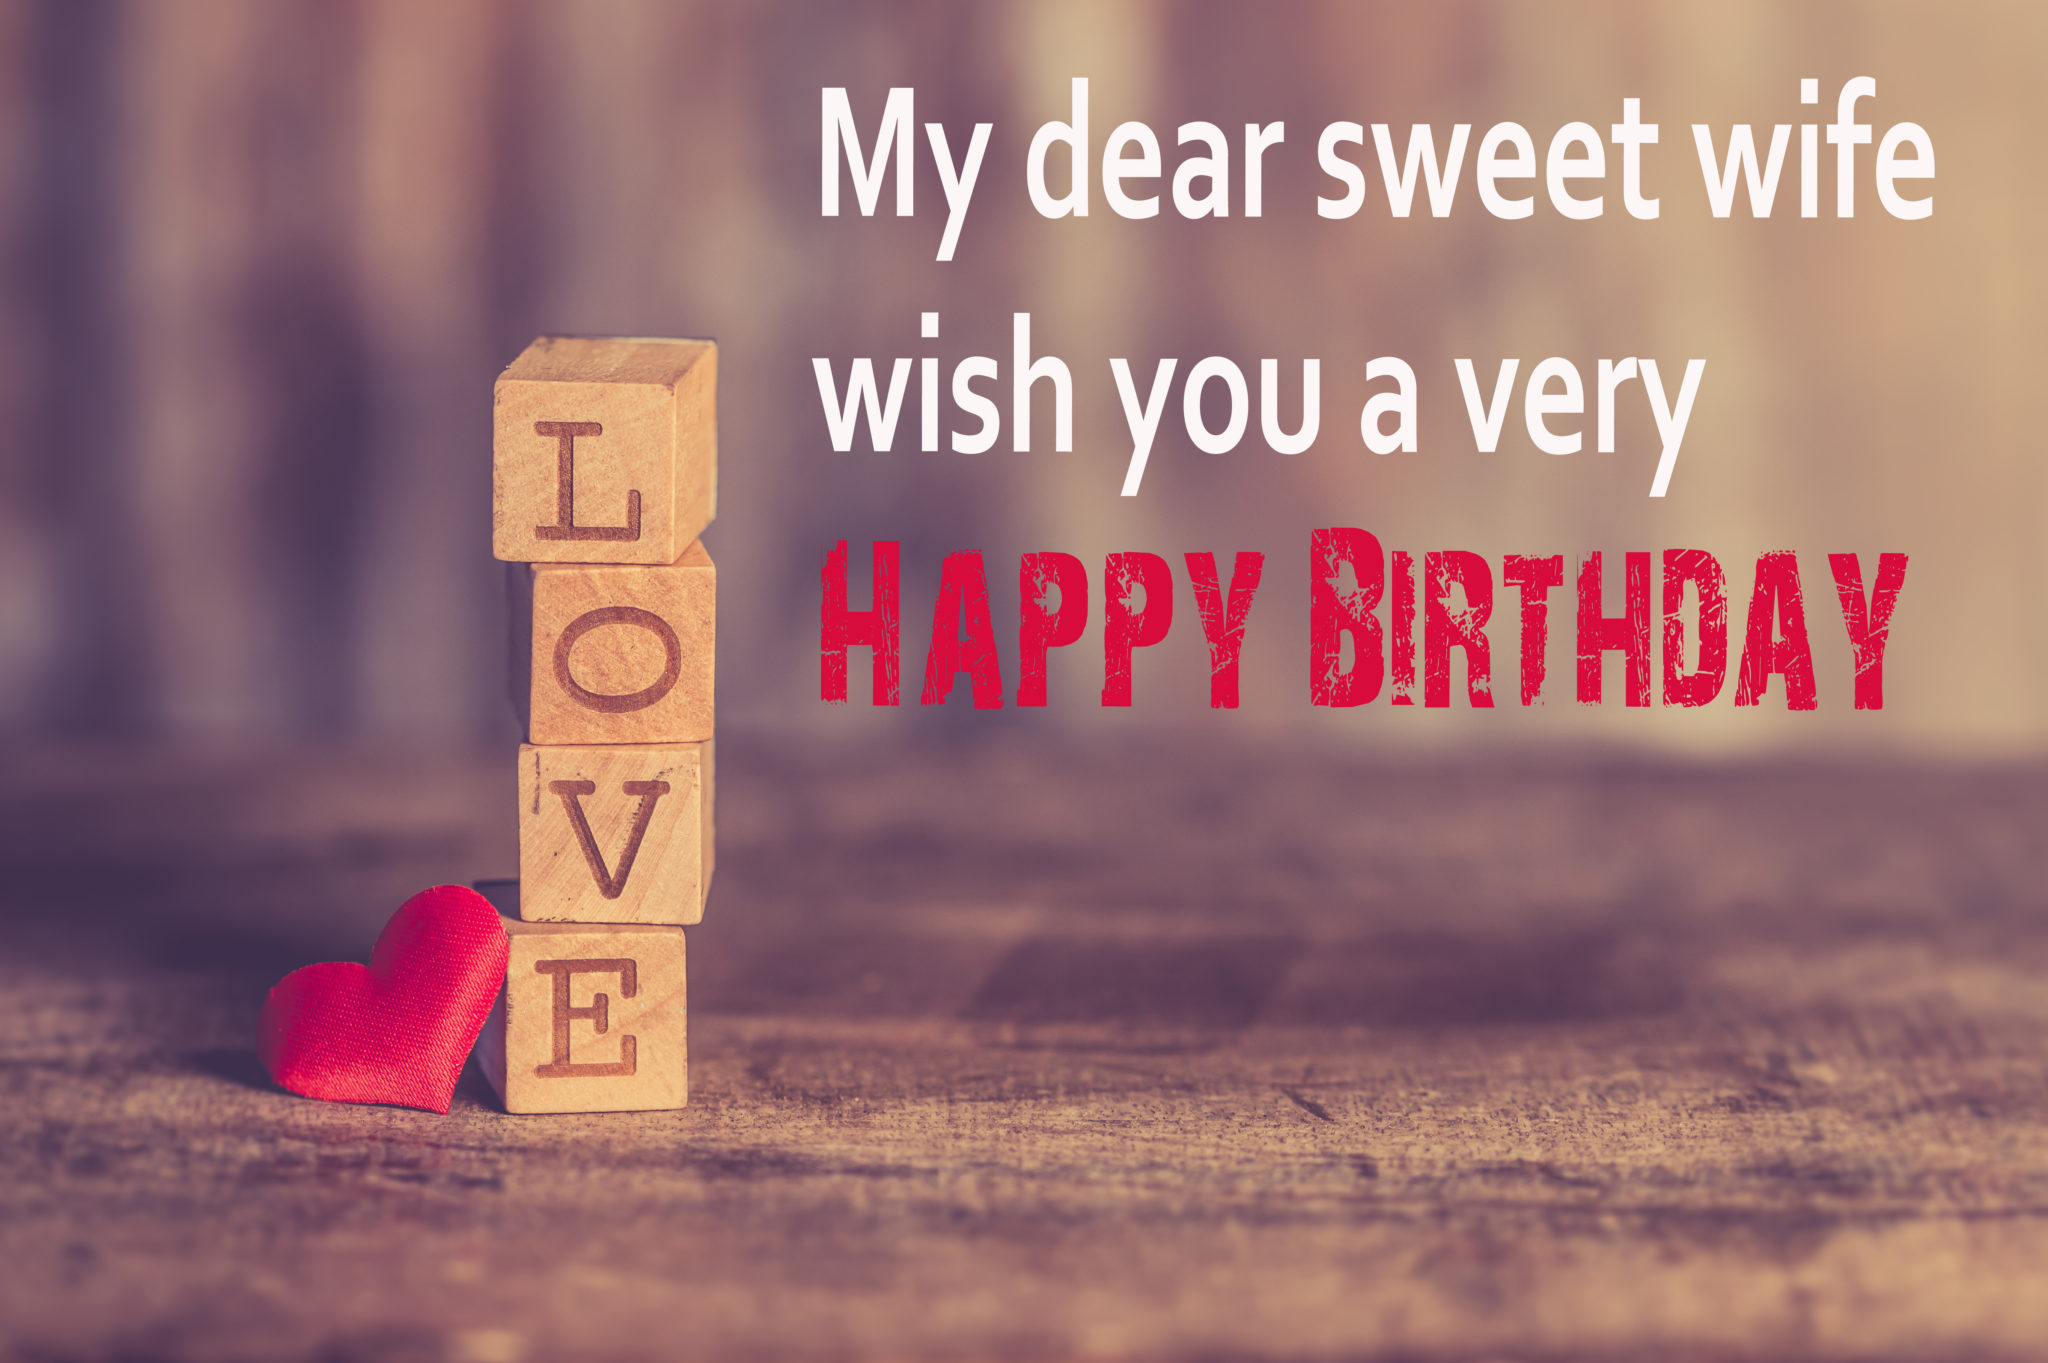 Best Birthday Wishes for WIFE (बीबी) with pics. Quotes, Status, Greetings